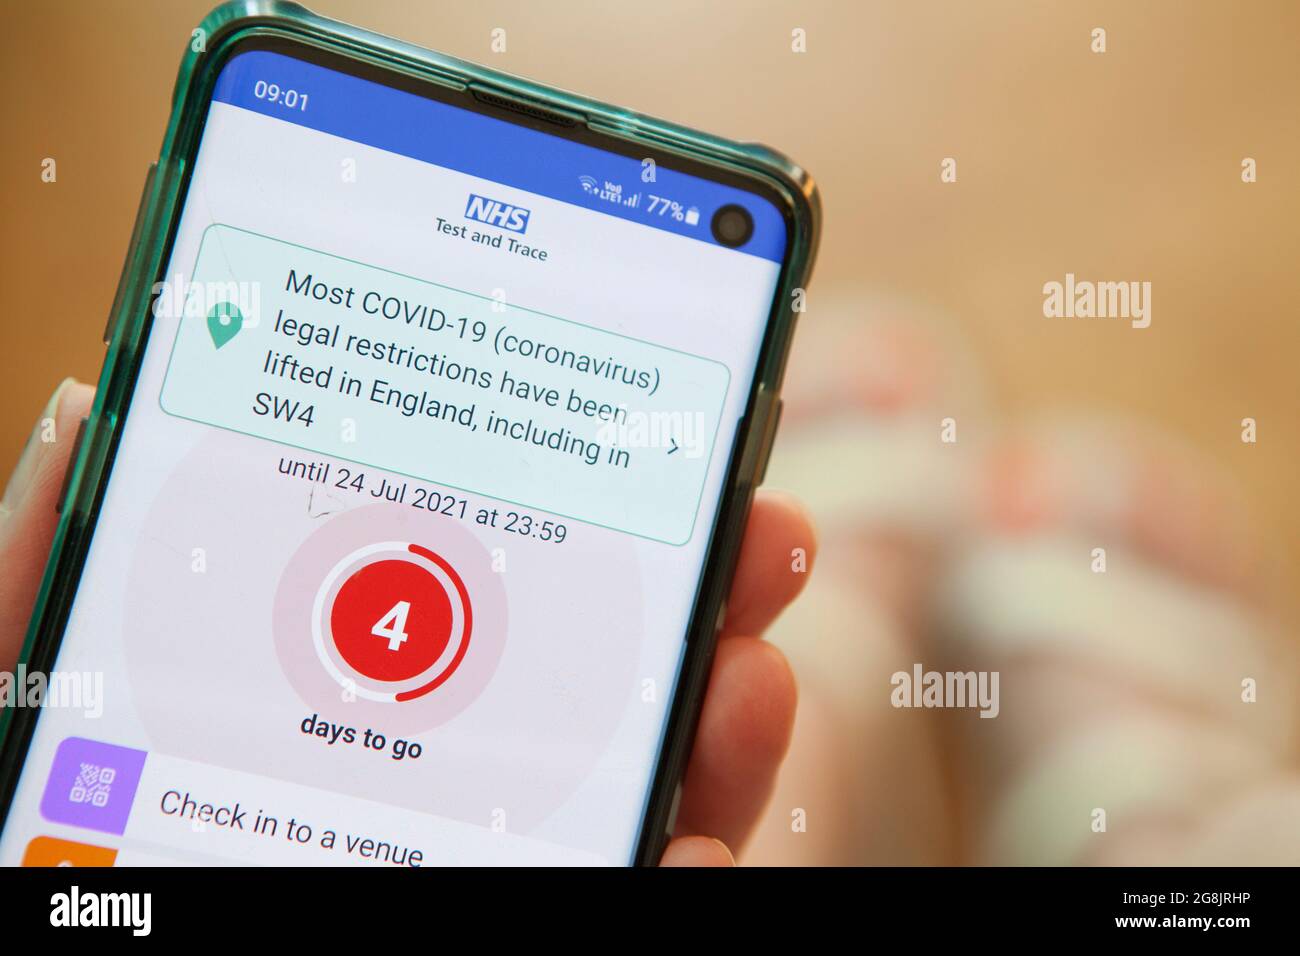 London, UK, 21 July 2021: A mobile phone shows a notification to self-isolate due to possible covid exposure, sent by the NHS covid app. The count-down shows 4 days to go out of the 10-day self-isolation period. The instructions given are not to leave your home even for daily exercise but as the app is not legally binding, unlike Track and Trace, it is not known what proportion of people are following the recommendations. Anna Watson/Alamy Live News Stock Photo